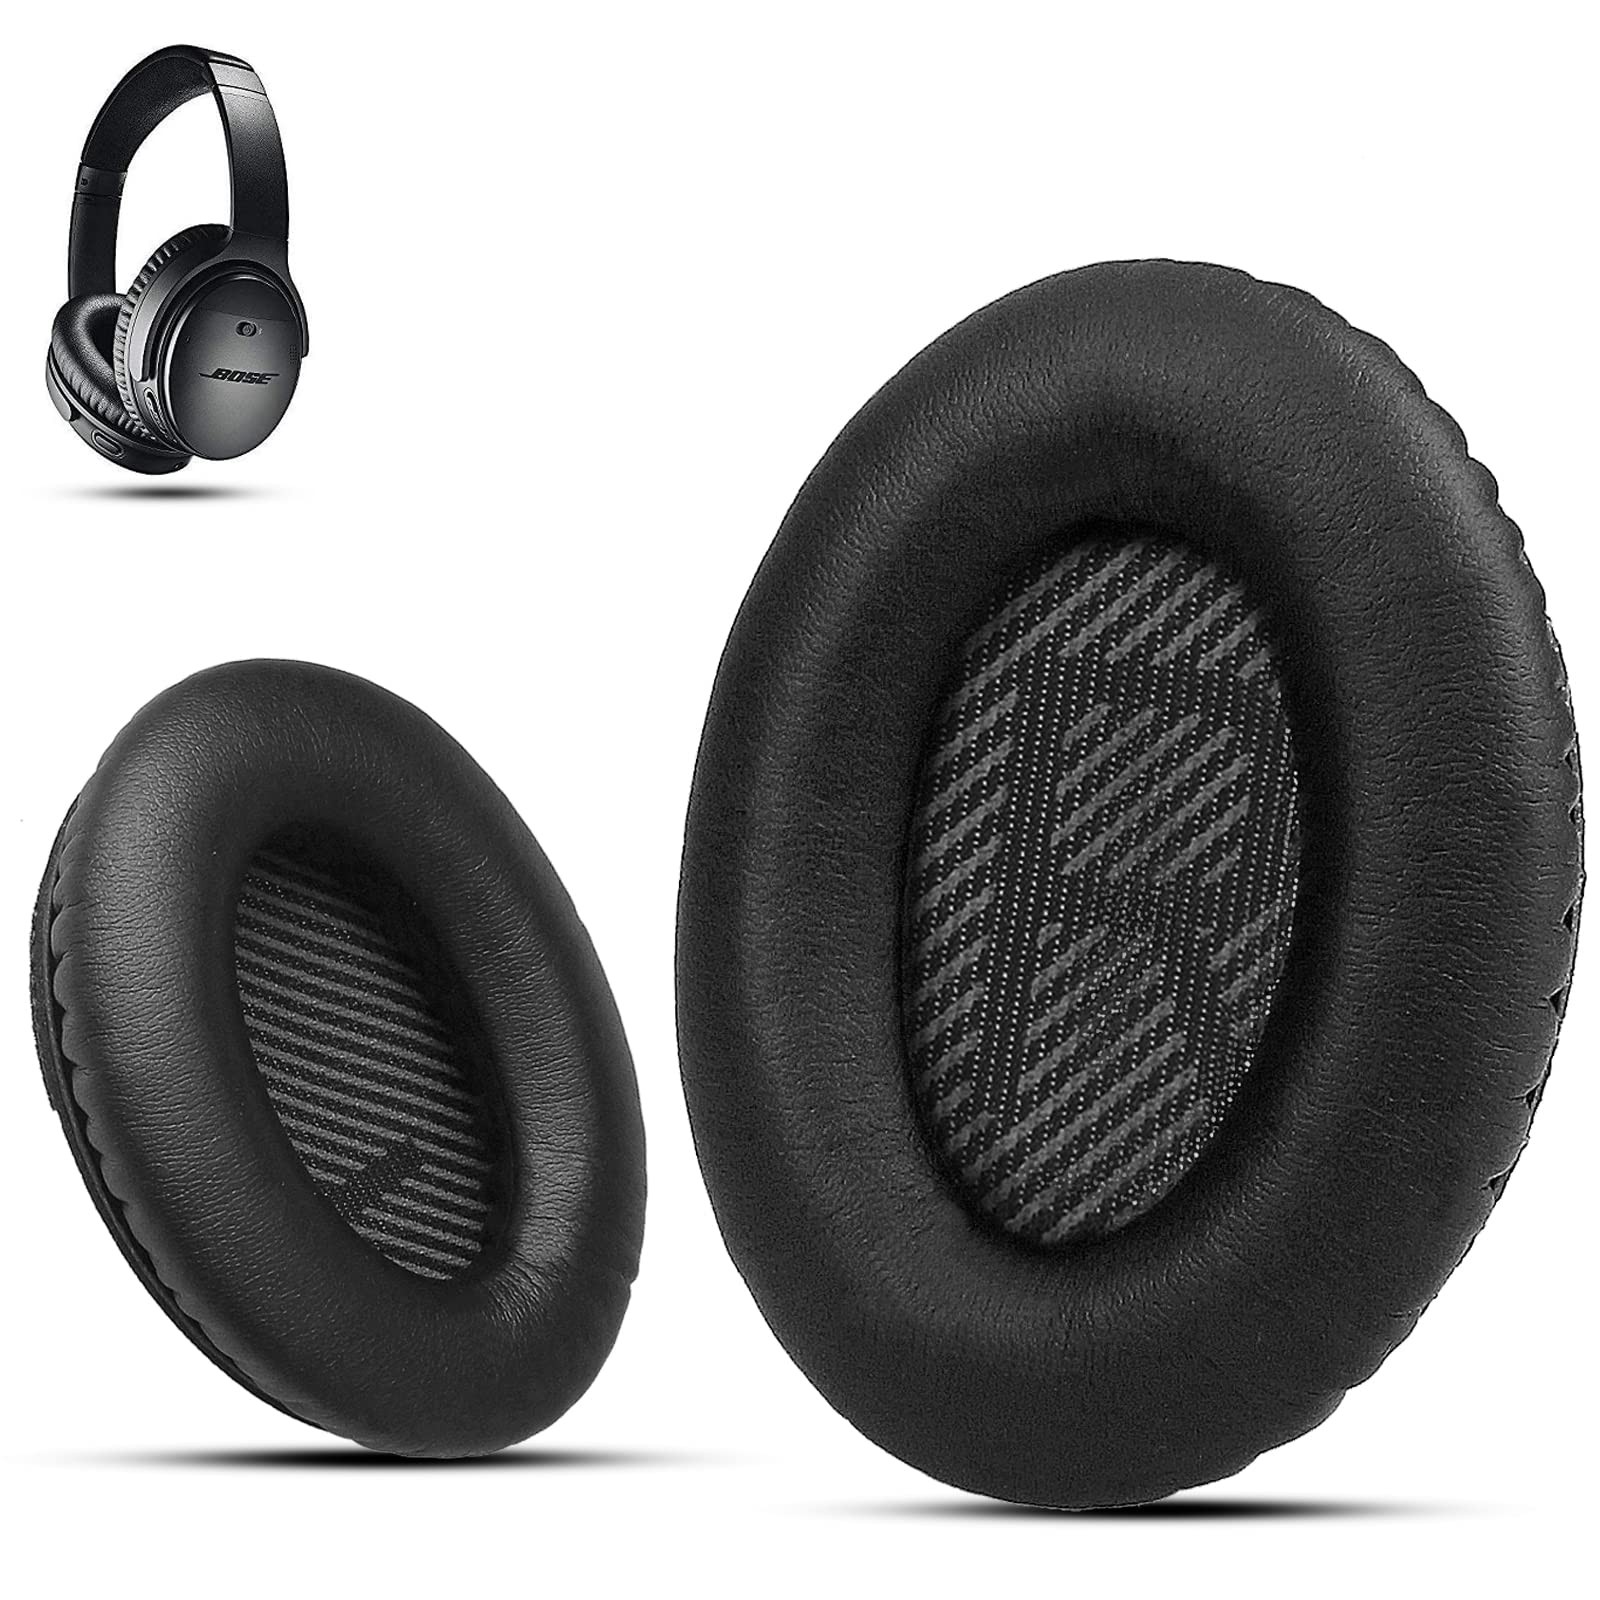 Premium Ear Pad Replacement for Bose Headphones Earpads Compatible with Bose  QuietComfort 35 ii /QC35 /QC25 /QC2 /QC15 /Ae2 /Ae2i /Ae2w /SoundTrue u0026  SoundLink by Krone Kalpasmos Classic Black